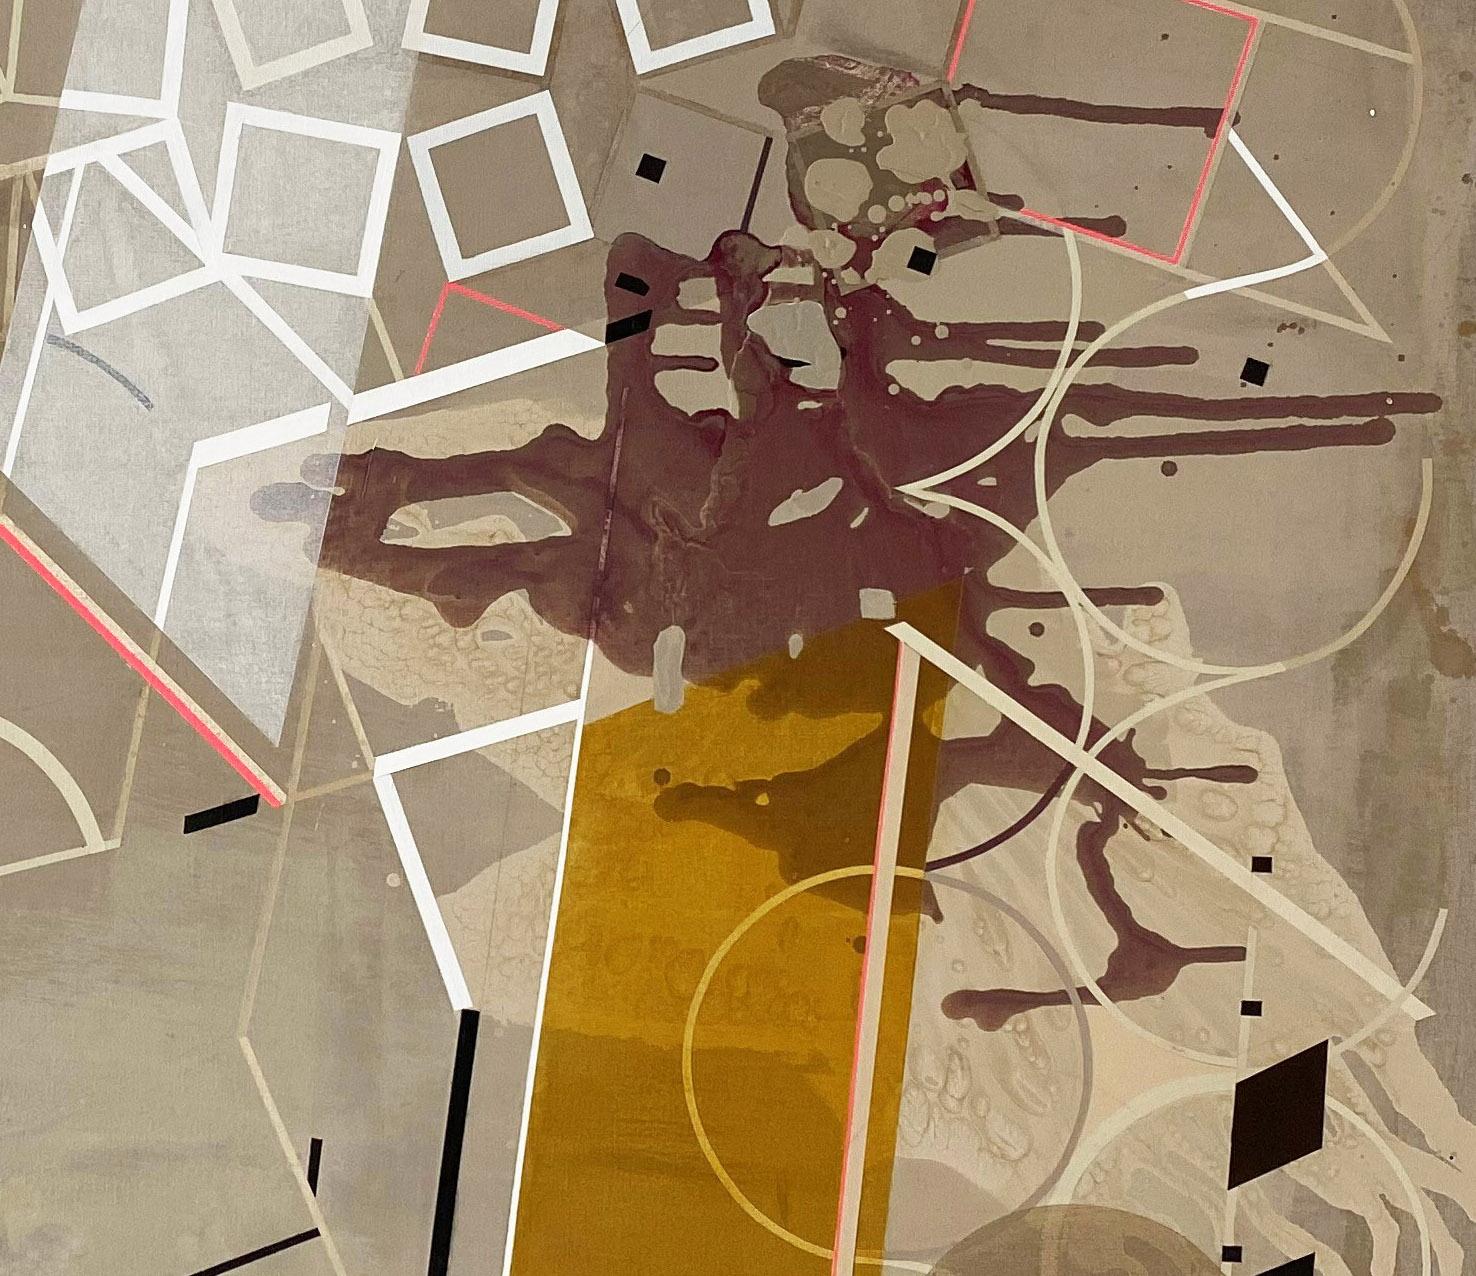 Geometric and gestural abstract painting on canvas in earth tones of beige, tan, and light brown with accents of dark magenta, light sienna, and neon pink 
Disturbances in the Field, 2019 by Jeanette Fintz
60 x 72 x 2 inches, acrylic on